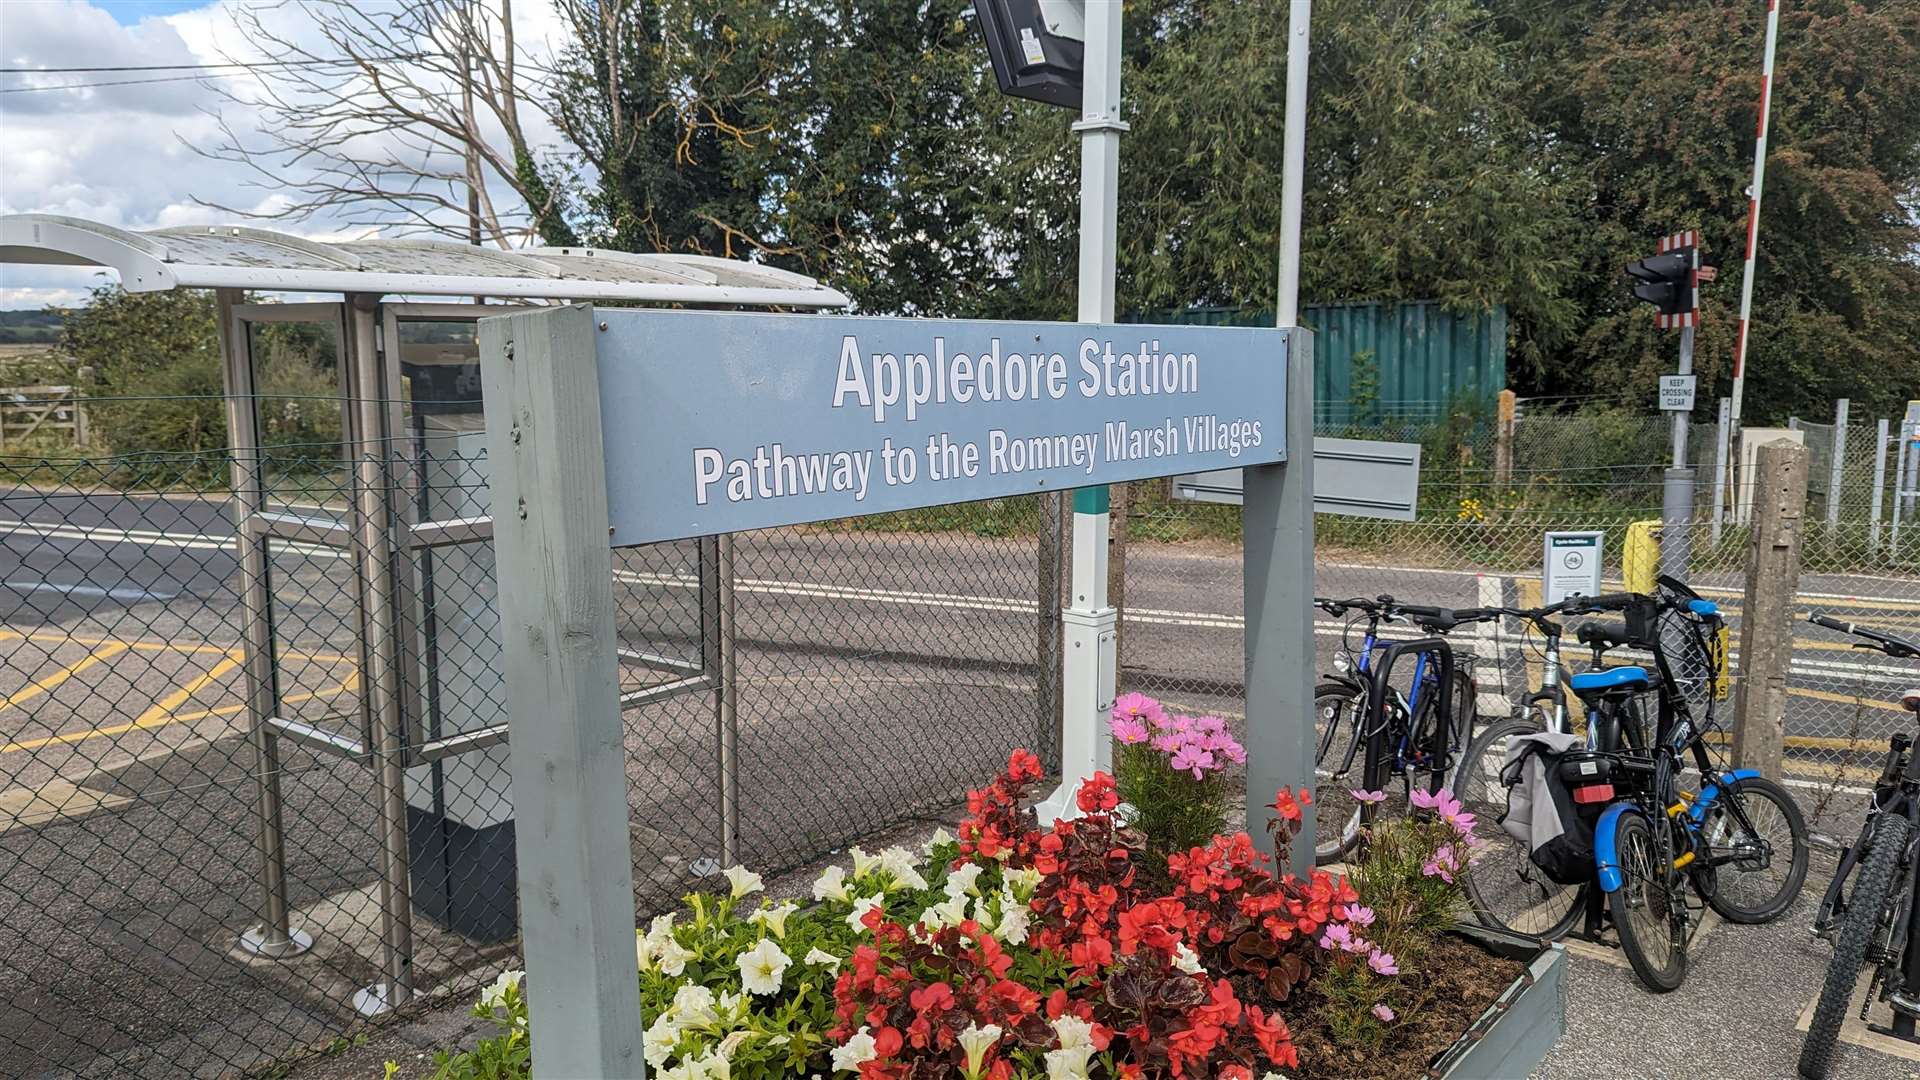 Appledore station proved to be a fair walk from the village itself